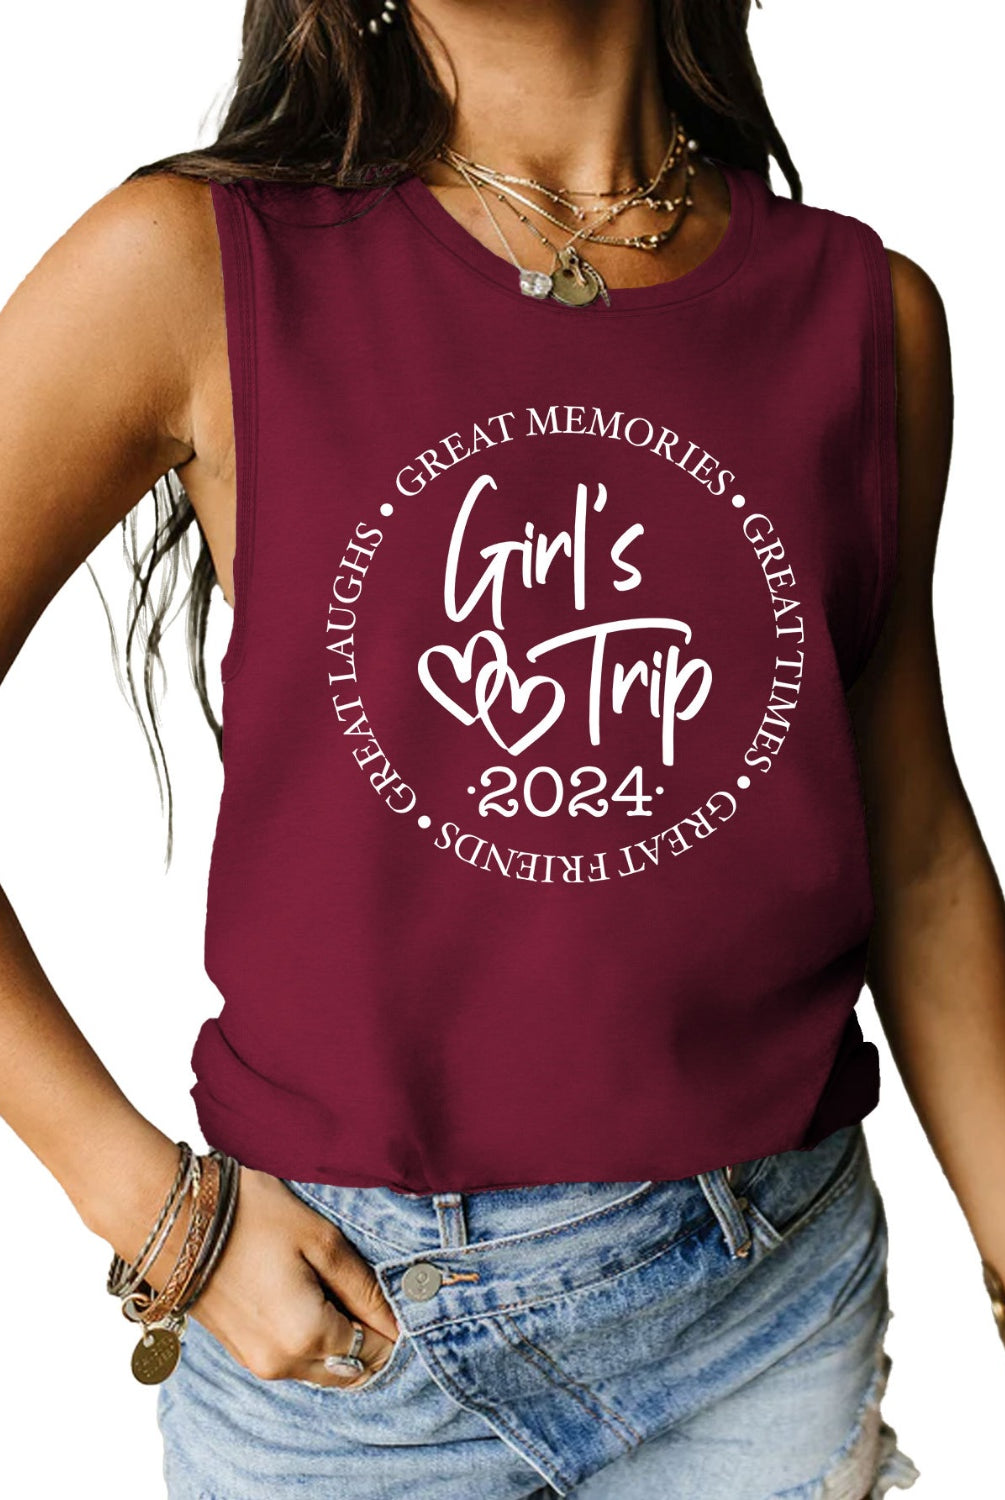 Celebrate Friendship with "Girl's Trip 2024" Graphic Tank | GemThreads Boutique - GemThreads Boutique Celebrate Friendship with "Girl's Trip 2024" Graphic Tank | GemThreads Boutique